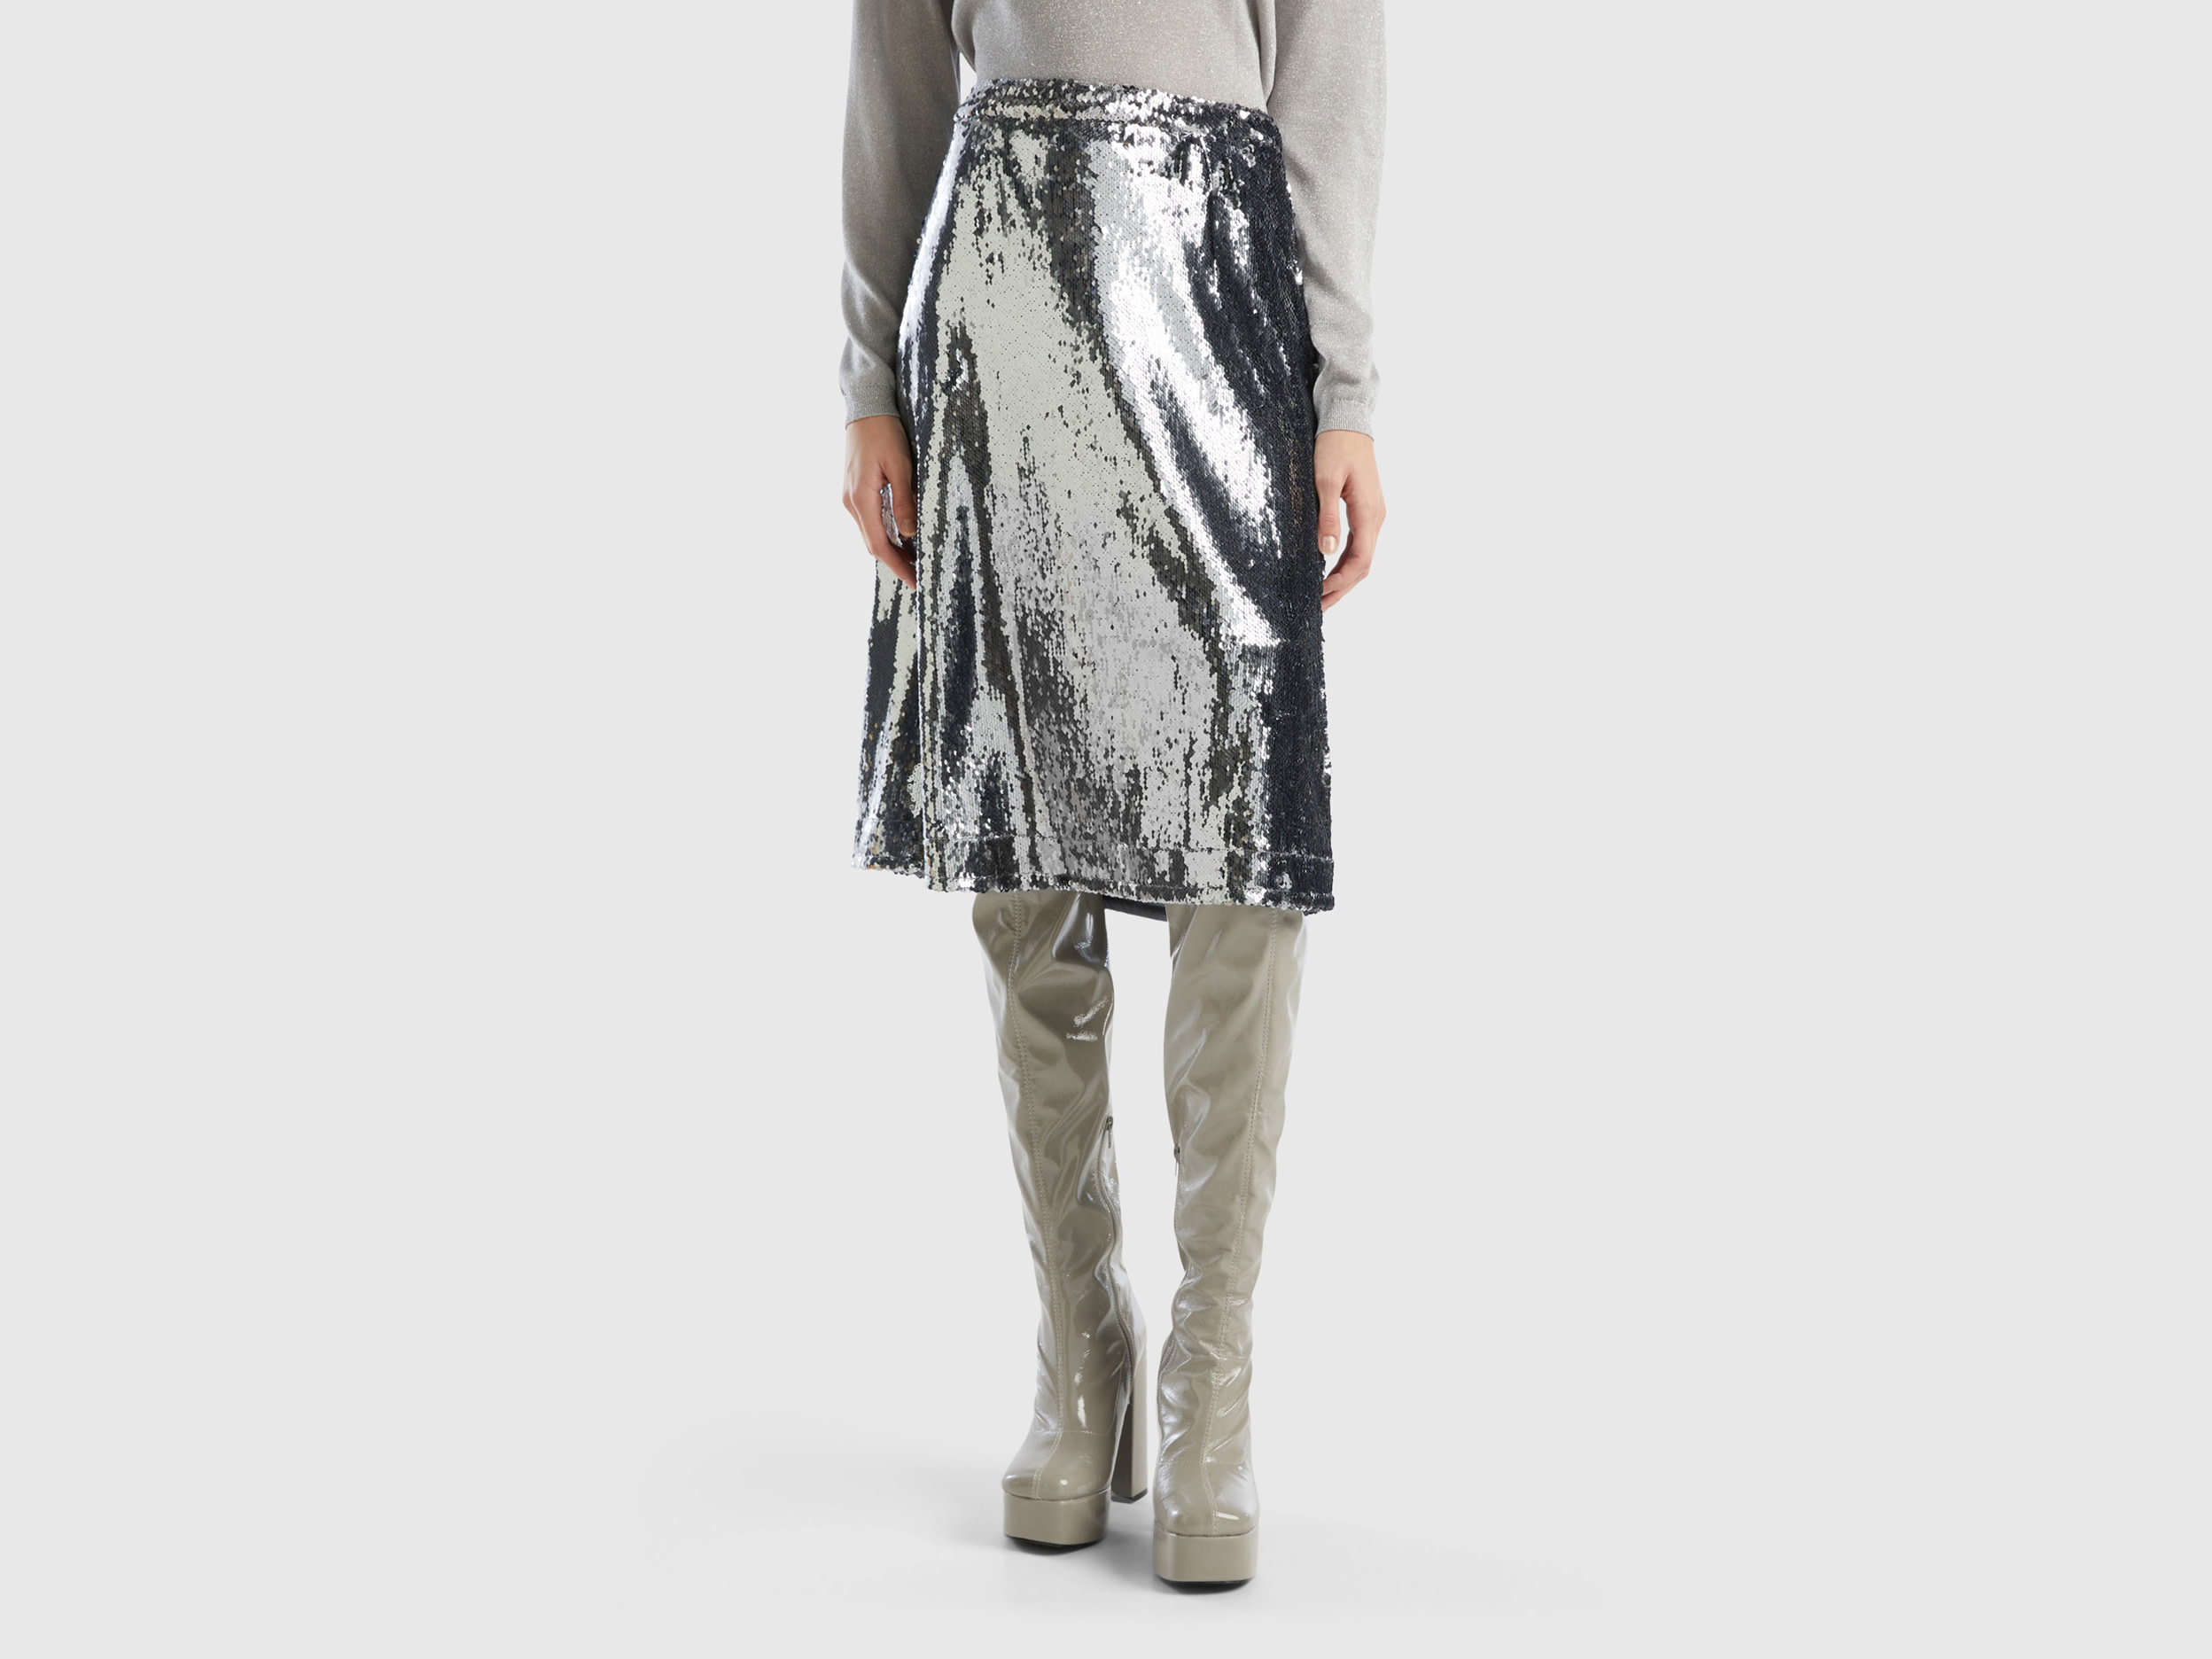 Benetton, Midi Skirt With Sequins, size 10, Silver, Women